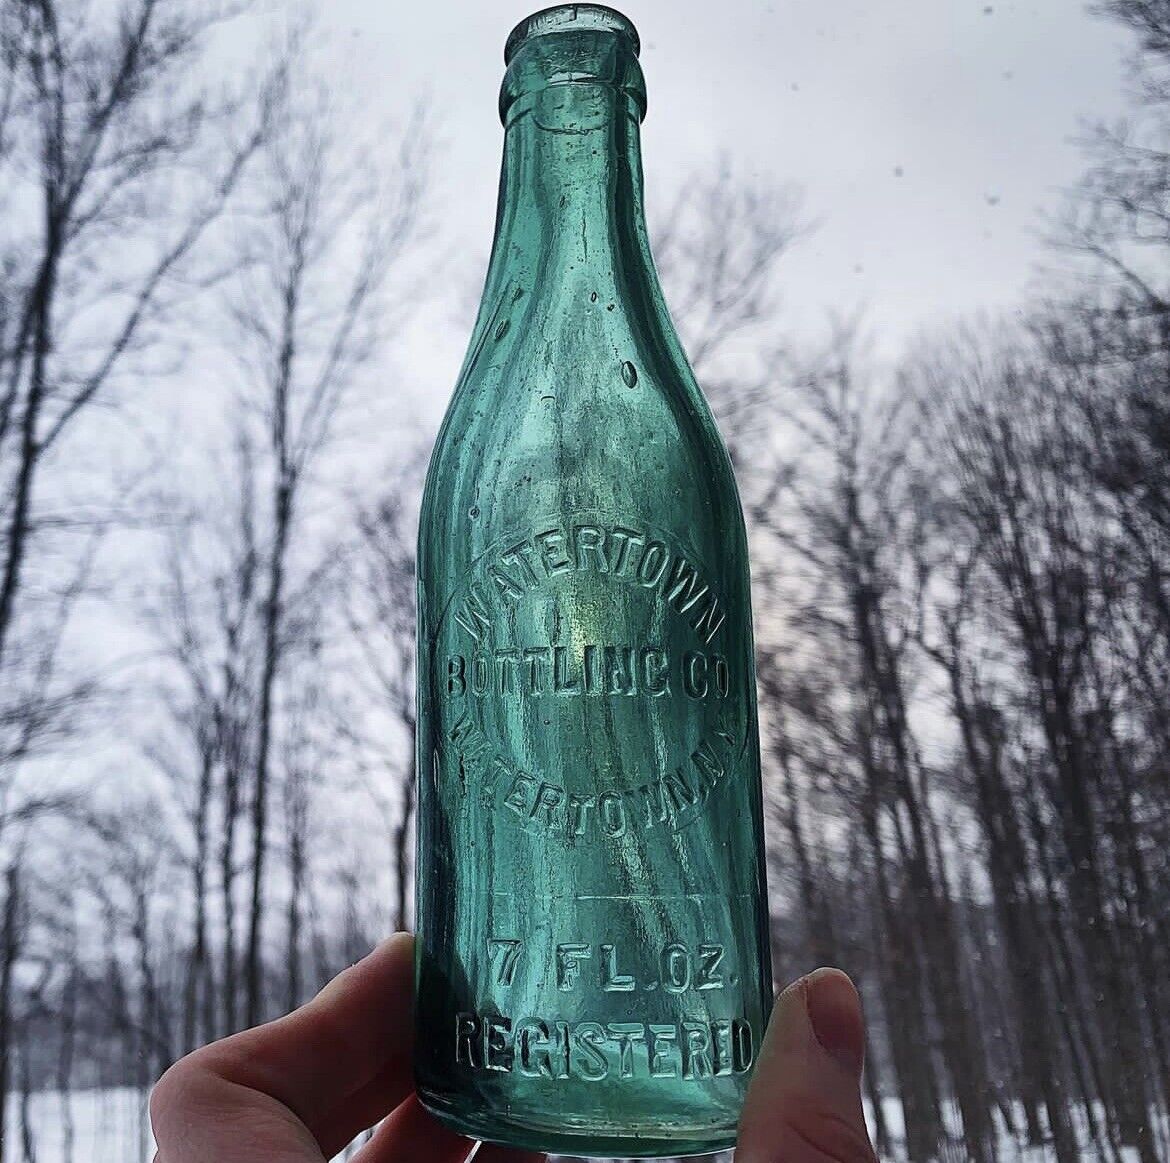 Watertown NY New York Bottling Company Green/Teal Antique Bottle 